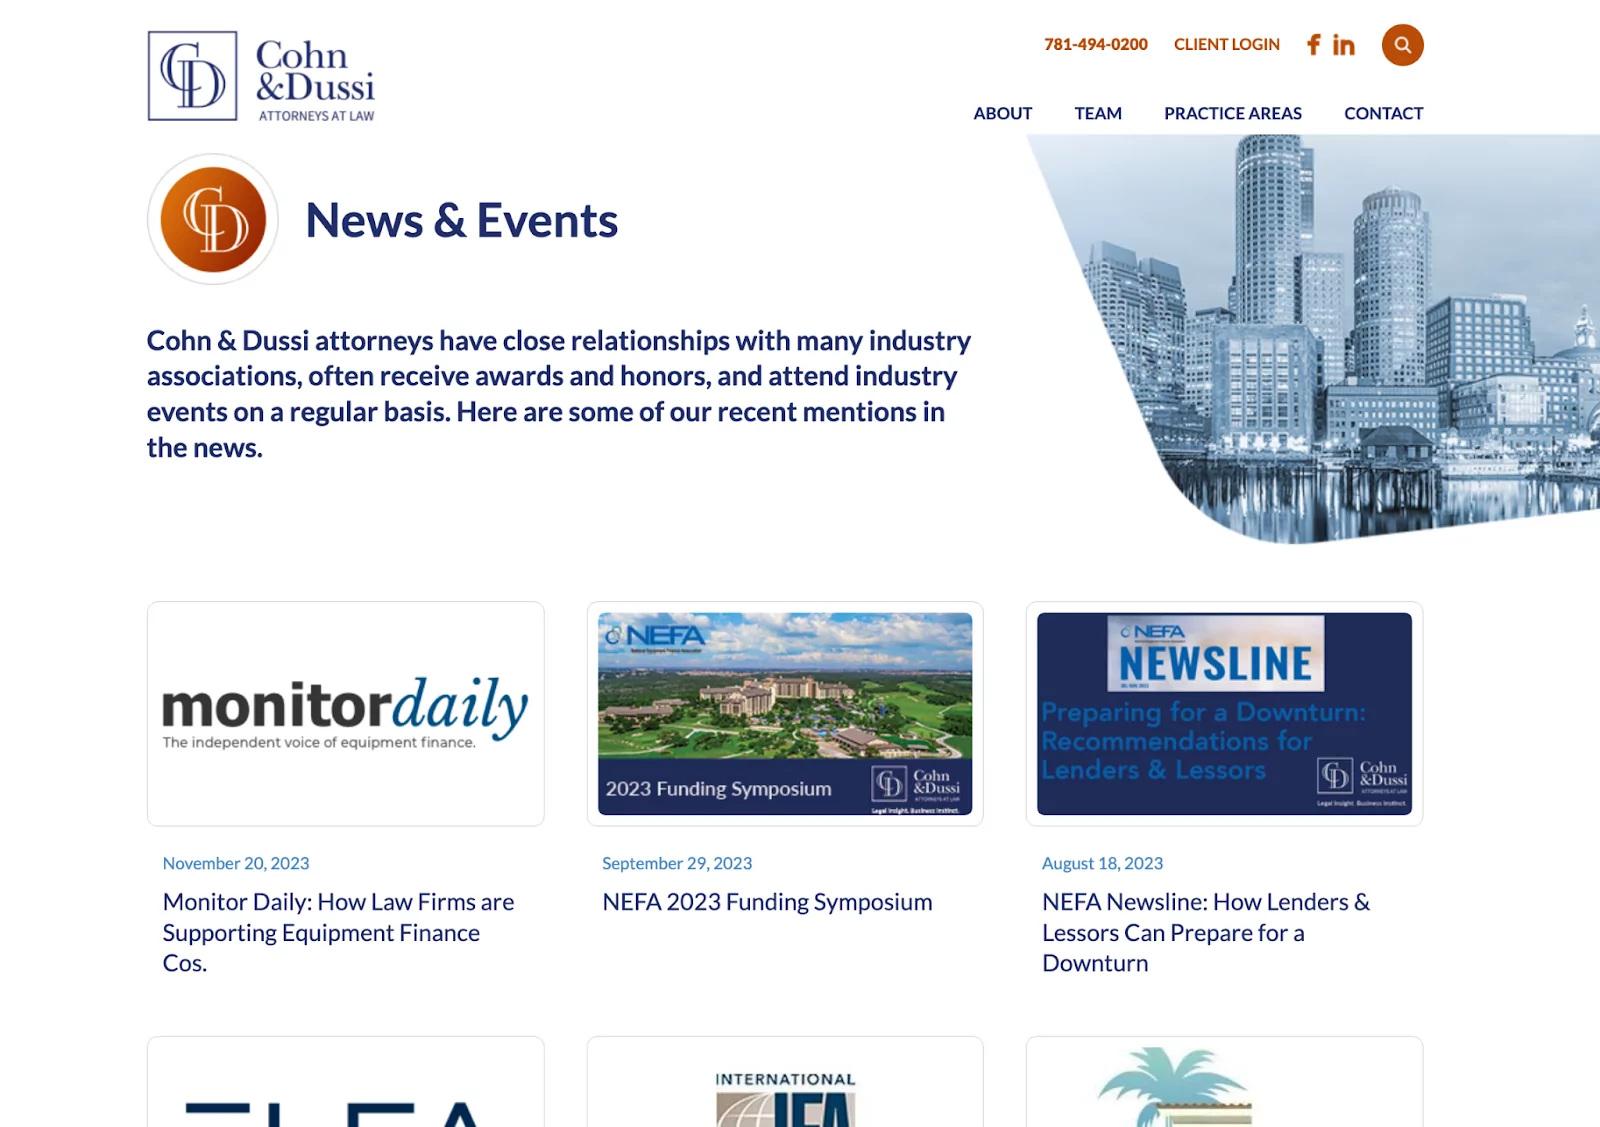 cohn & dussi news and events webpage